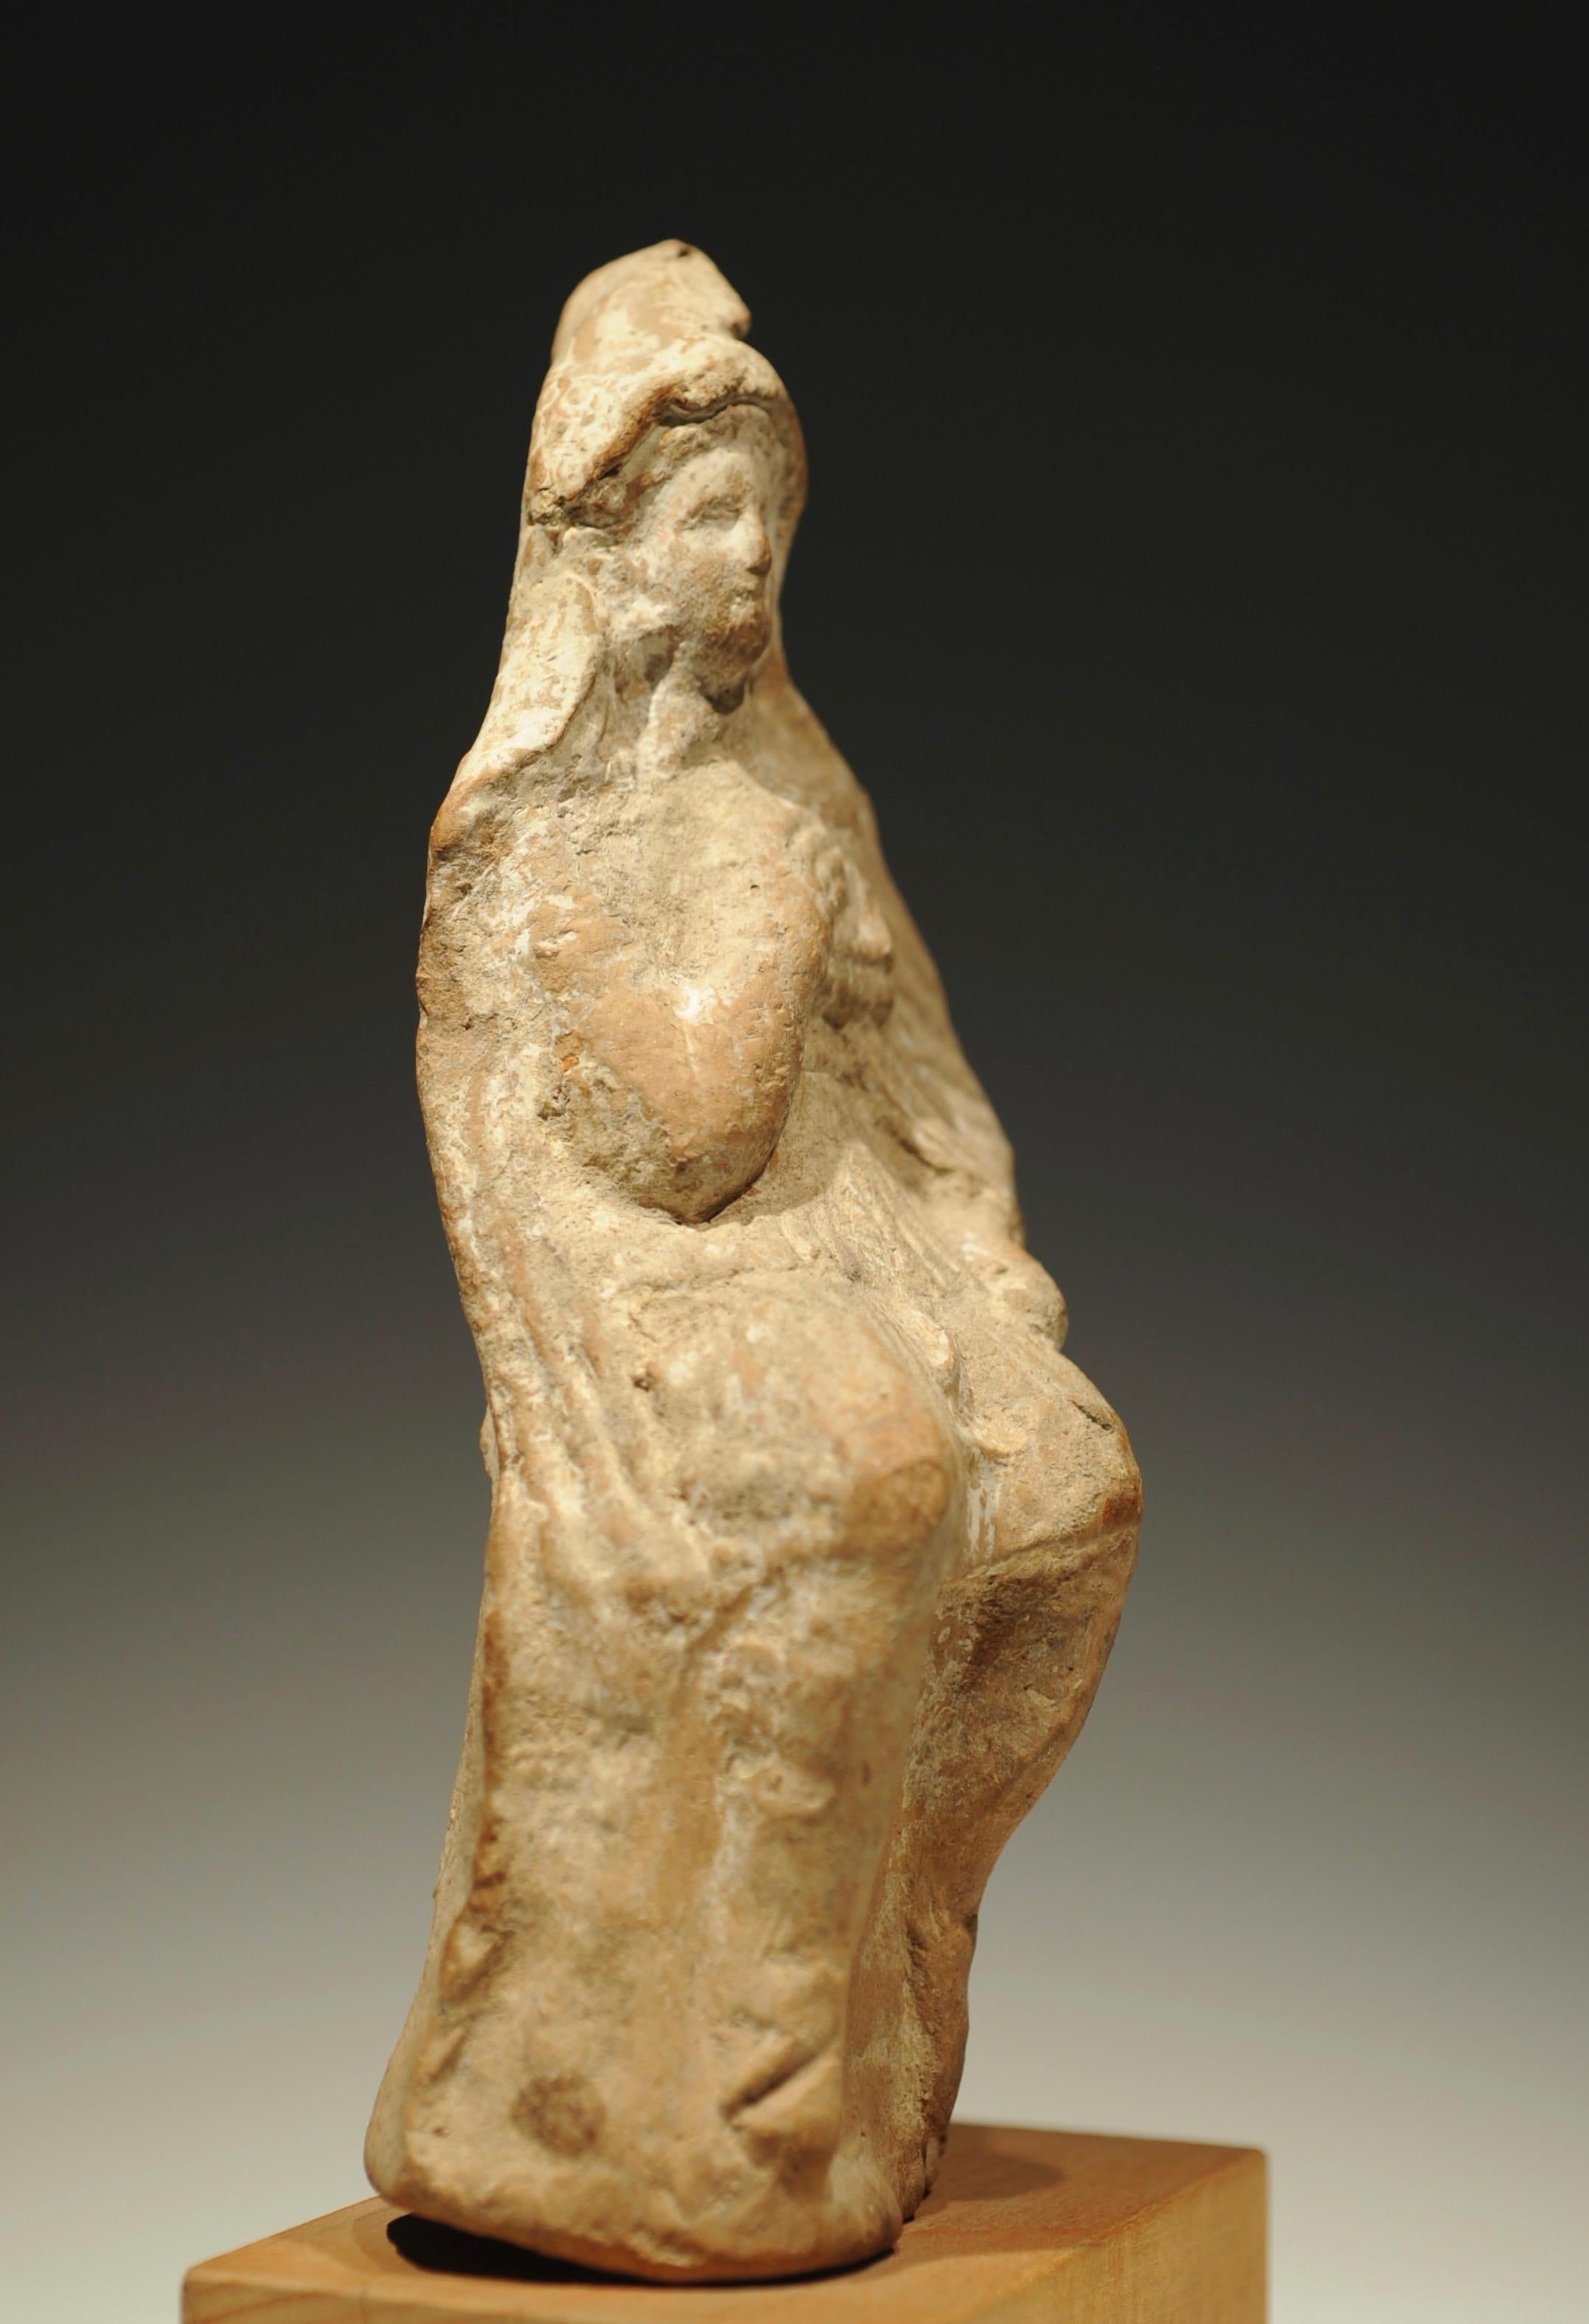 Terracotta statuette of a sitting shepherd god with syrinx. Greek, Amphipolis, circa 400 BC. Intact, no restorations.
Syrinx is a musical instruments also known as Pan flute. It is a musical instrument consisting of multiple pipes and is an